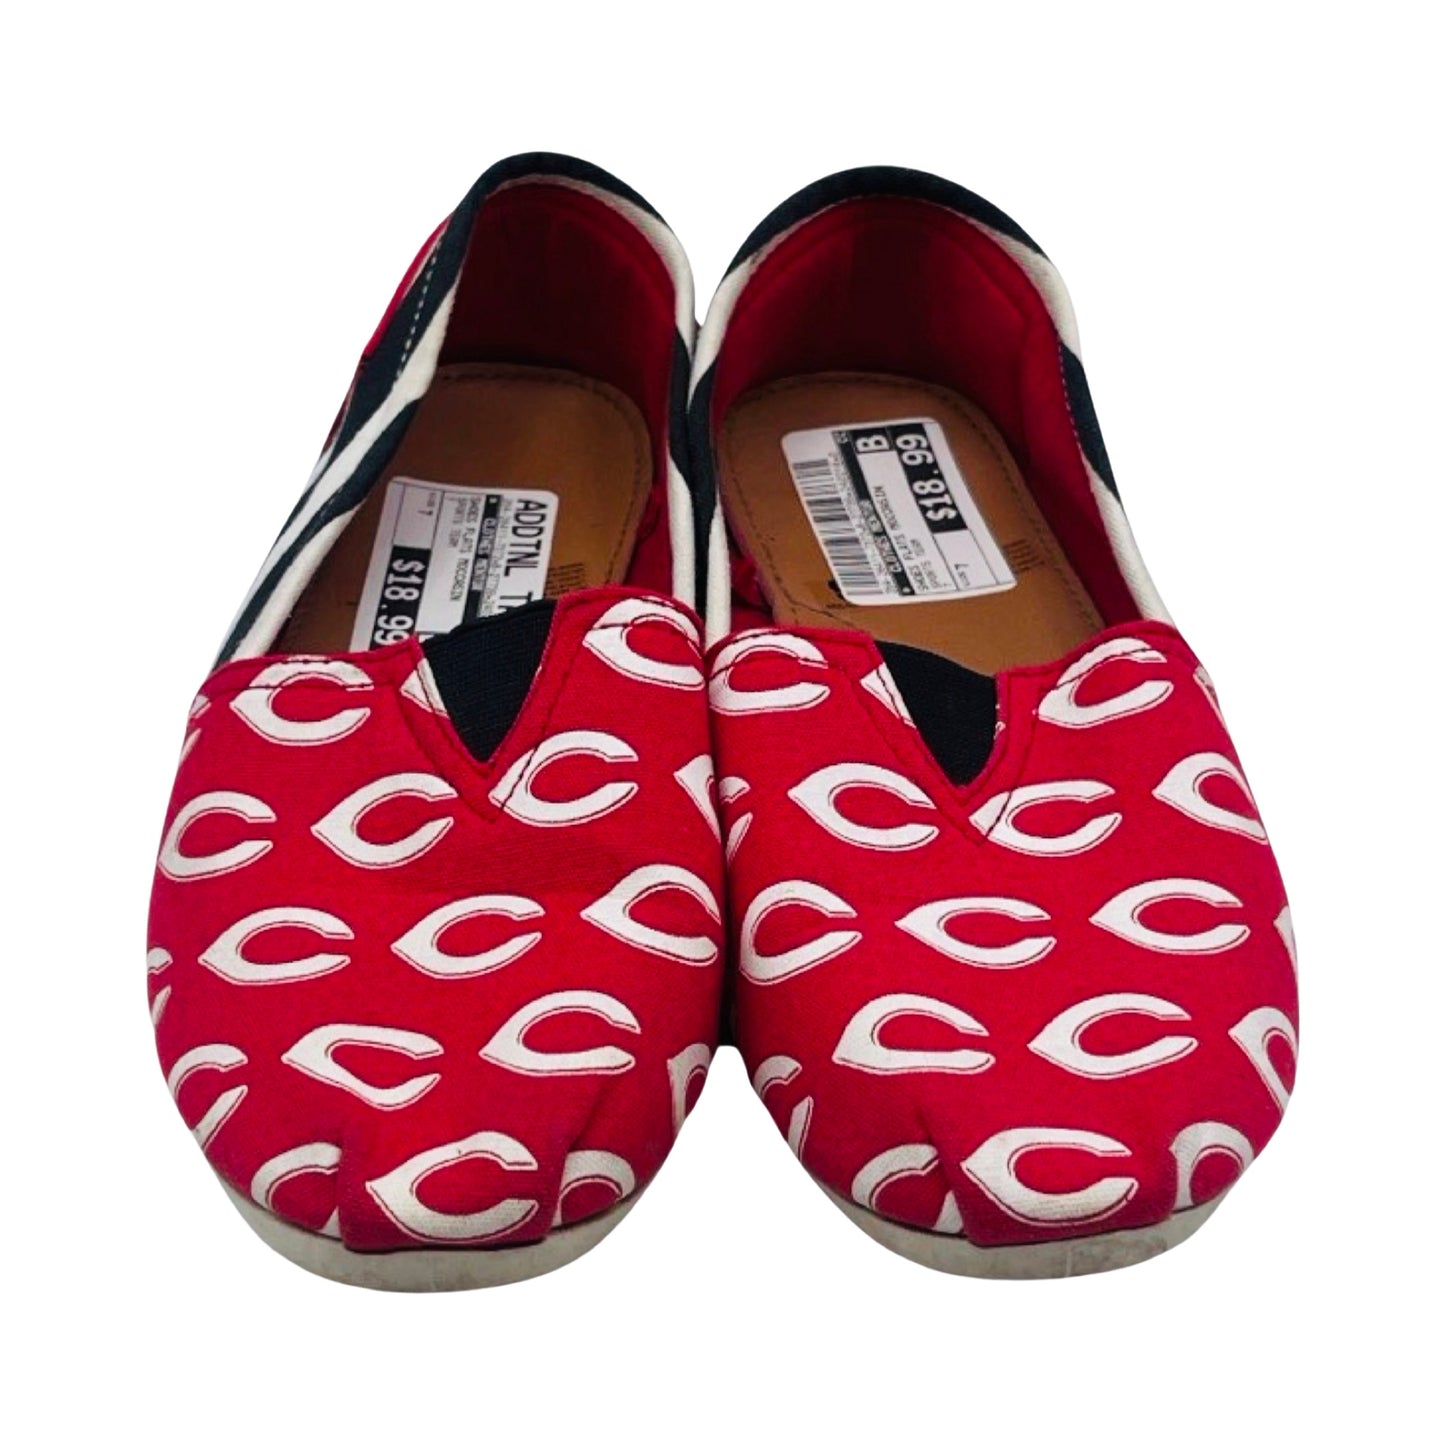 Cincinnati Reds Red with White C's Shoes Flats Moccasin By Clothes Mentor  Size: 7